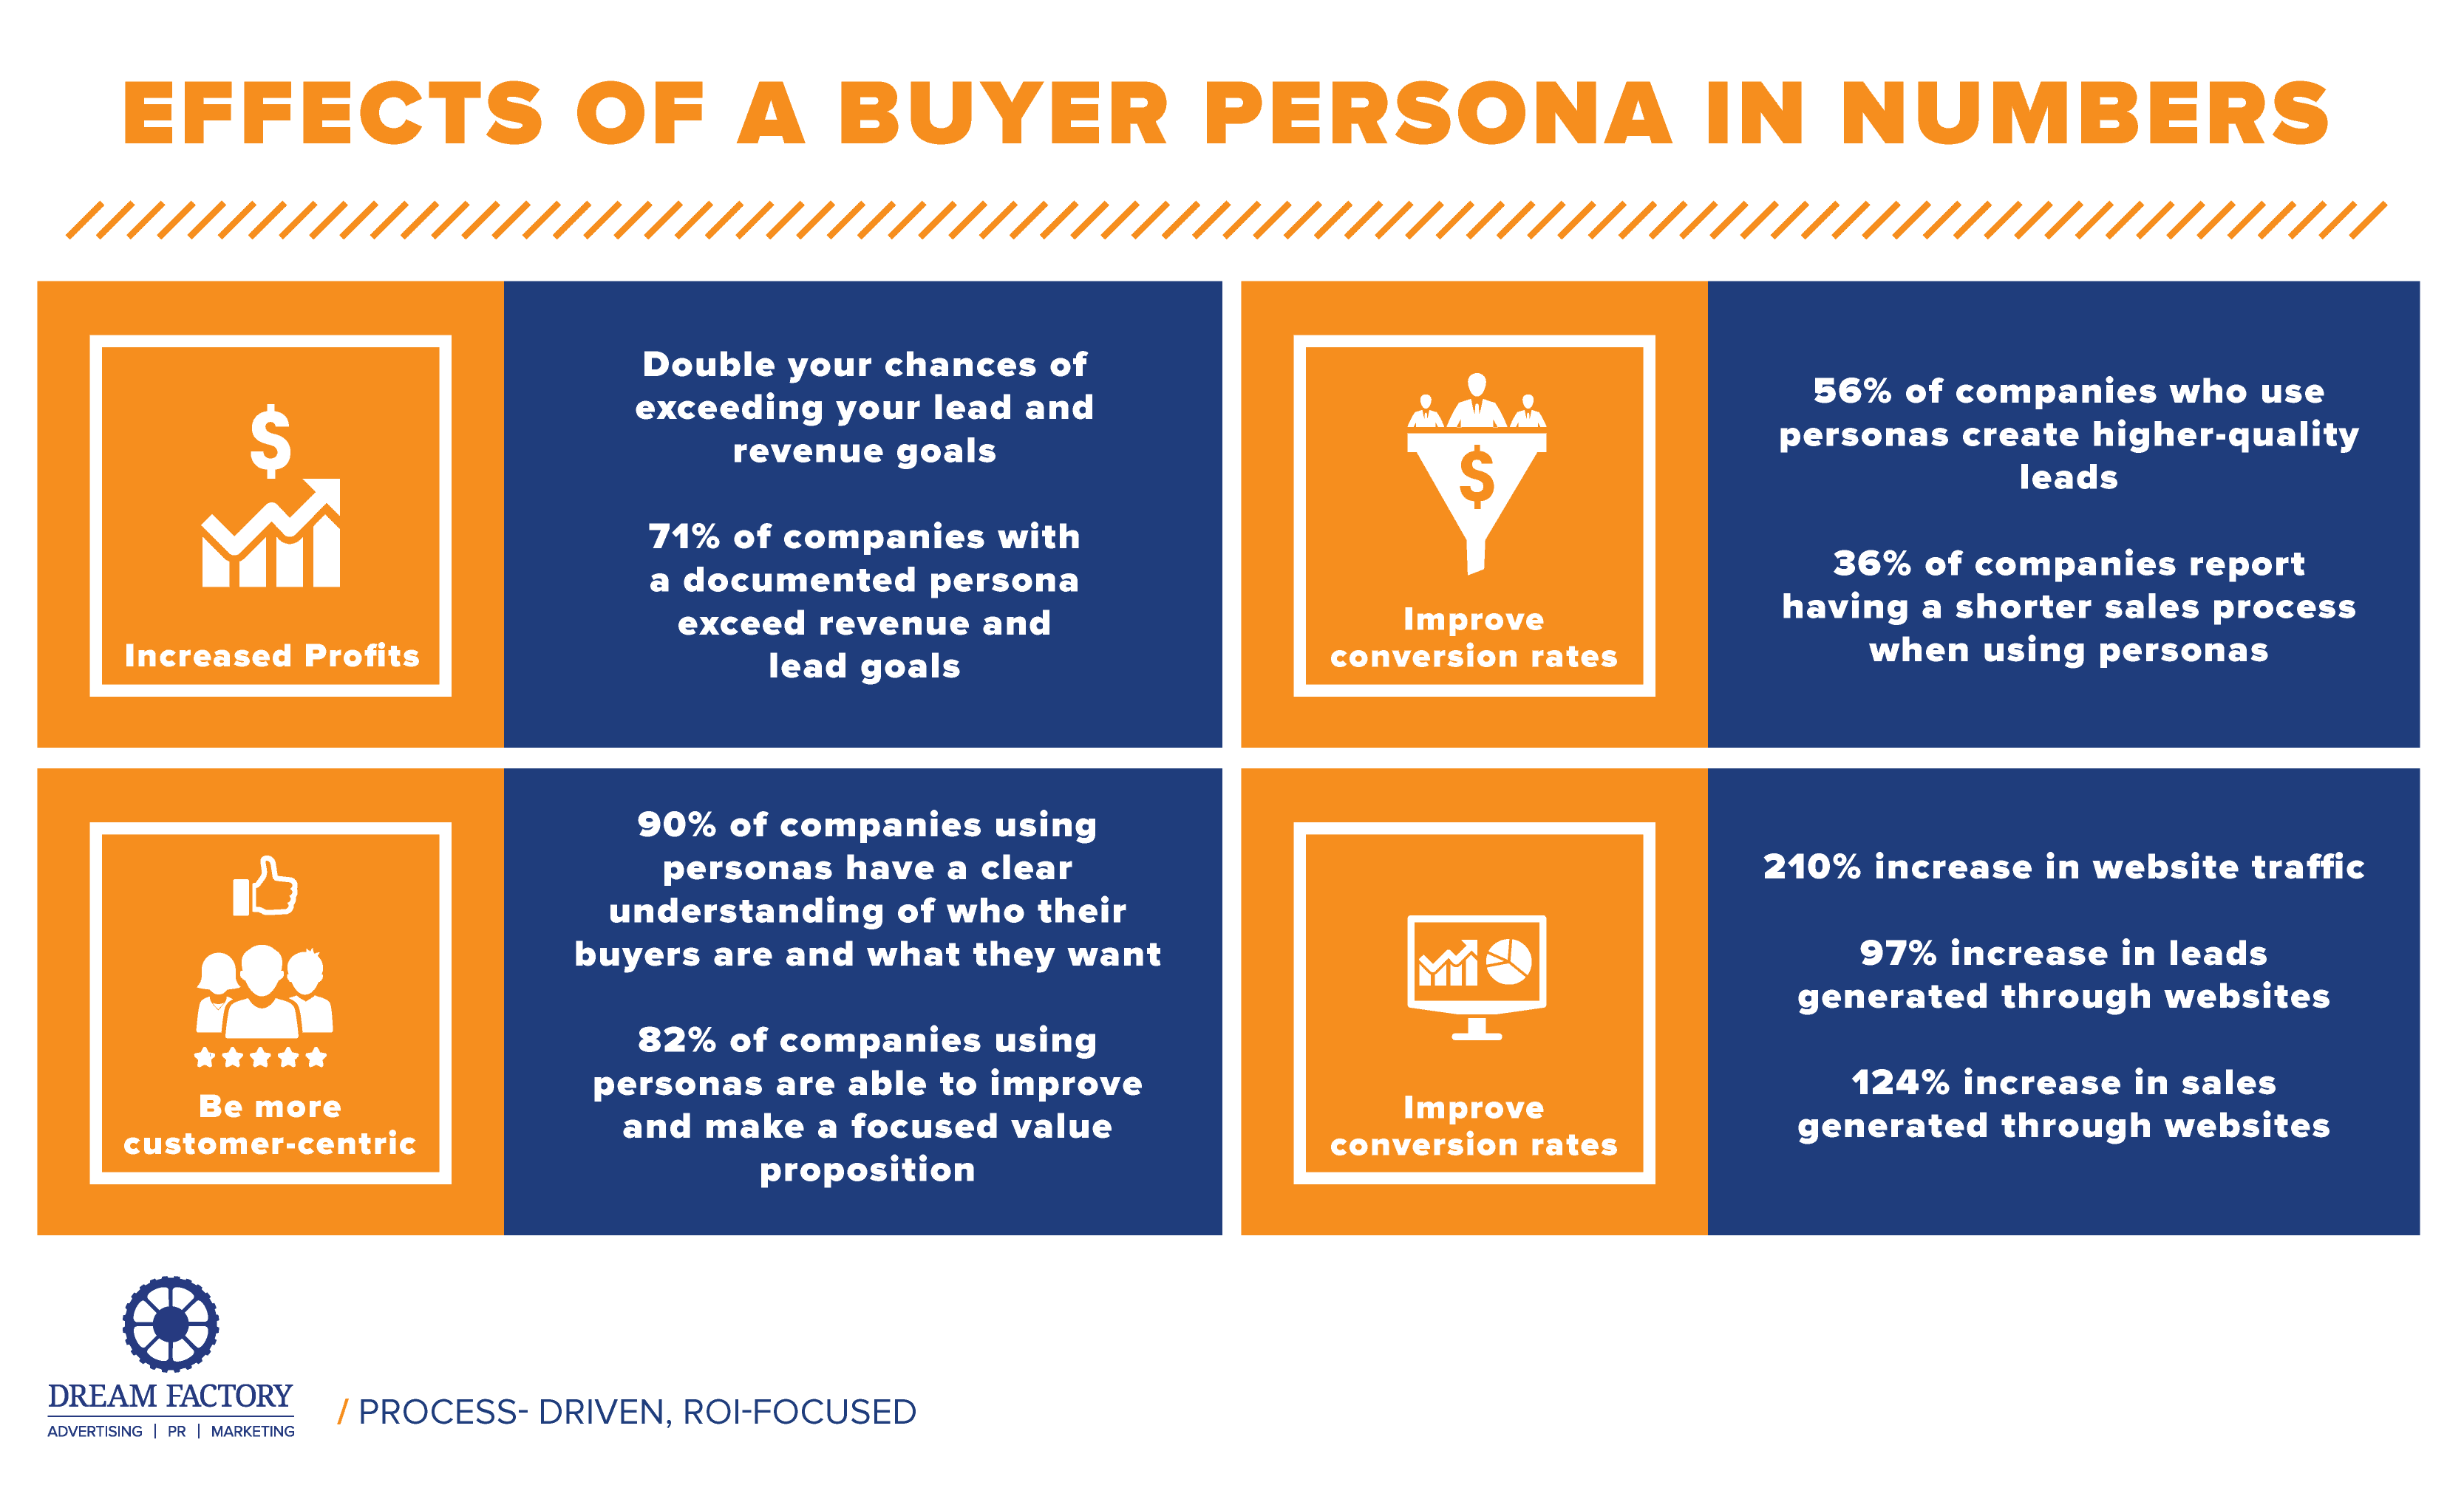 Infographic showing the effects of a B2B buyer persona